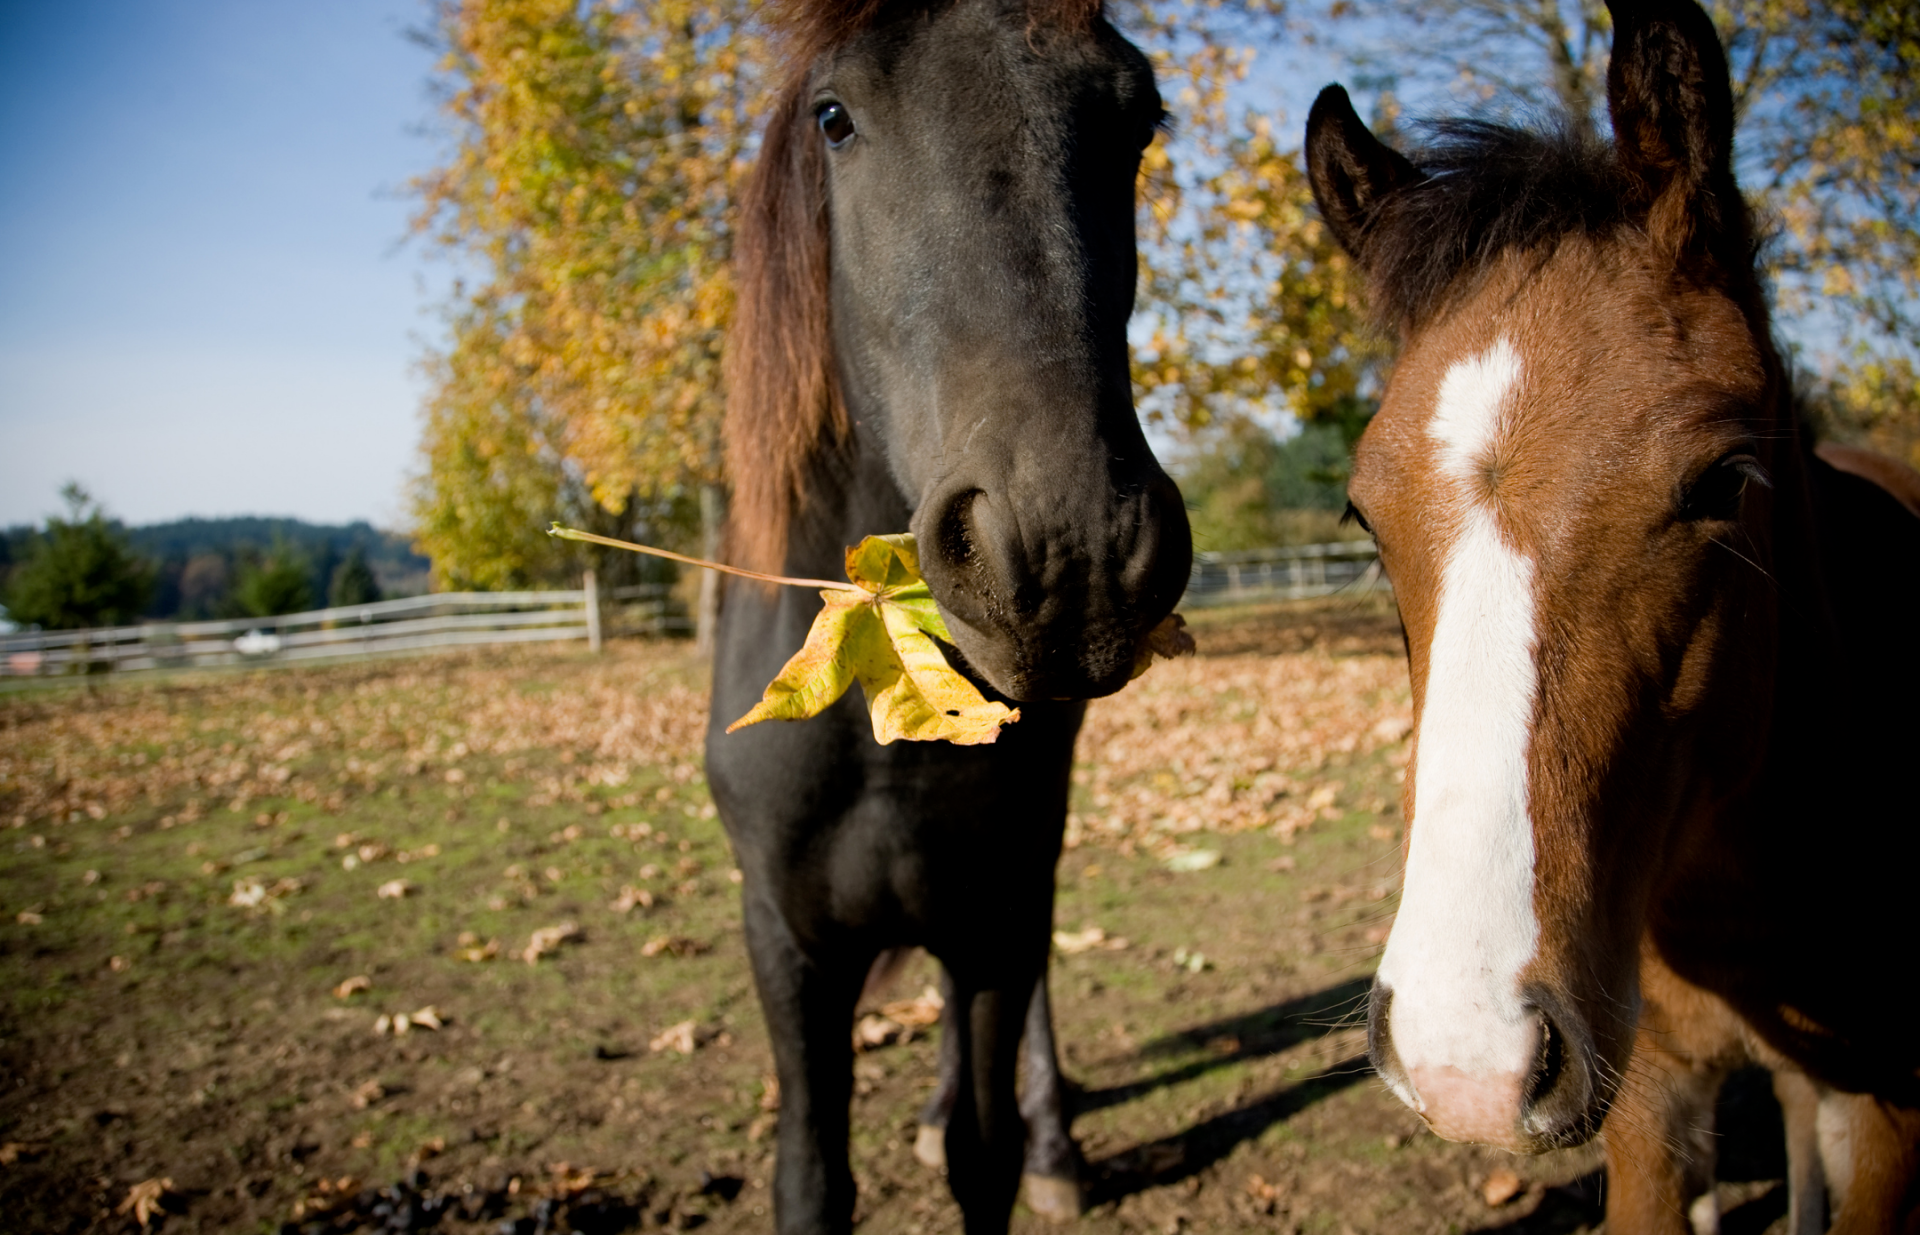 there's no simple test to determine whether your horse has ADHD